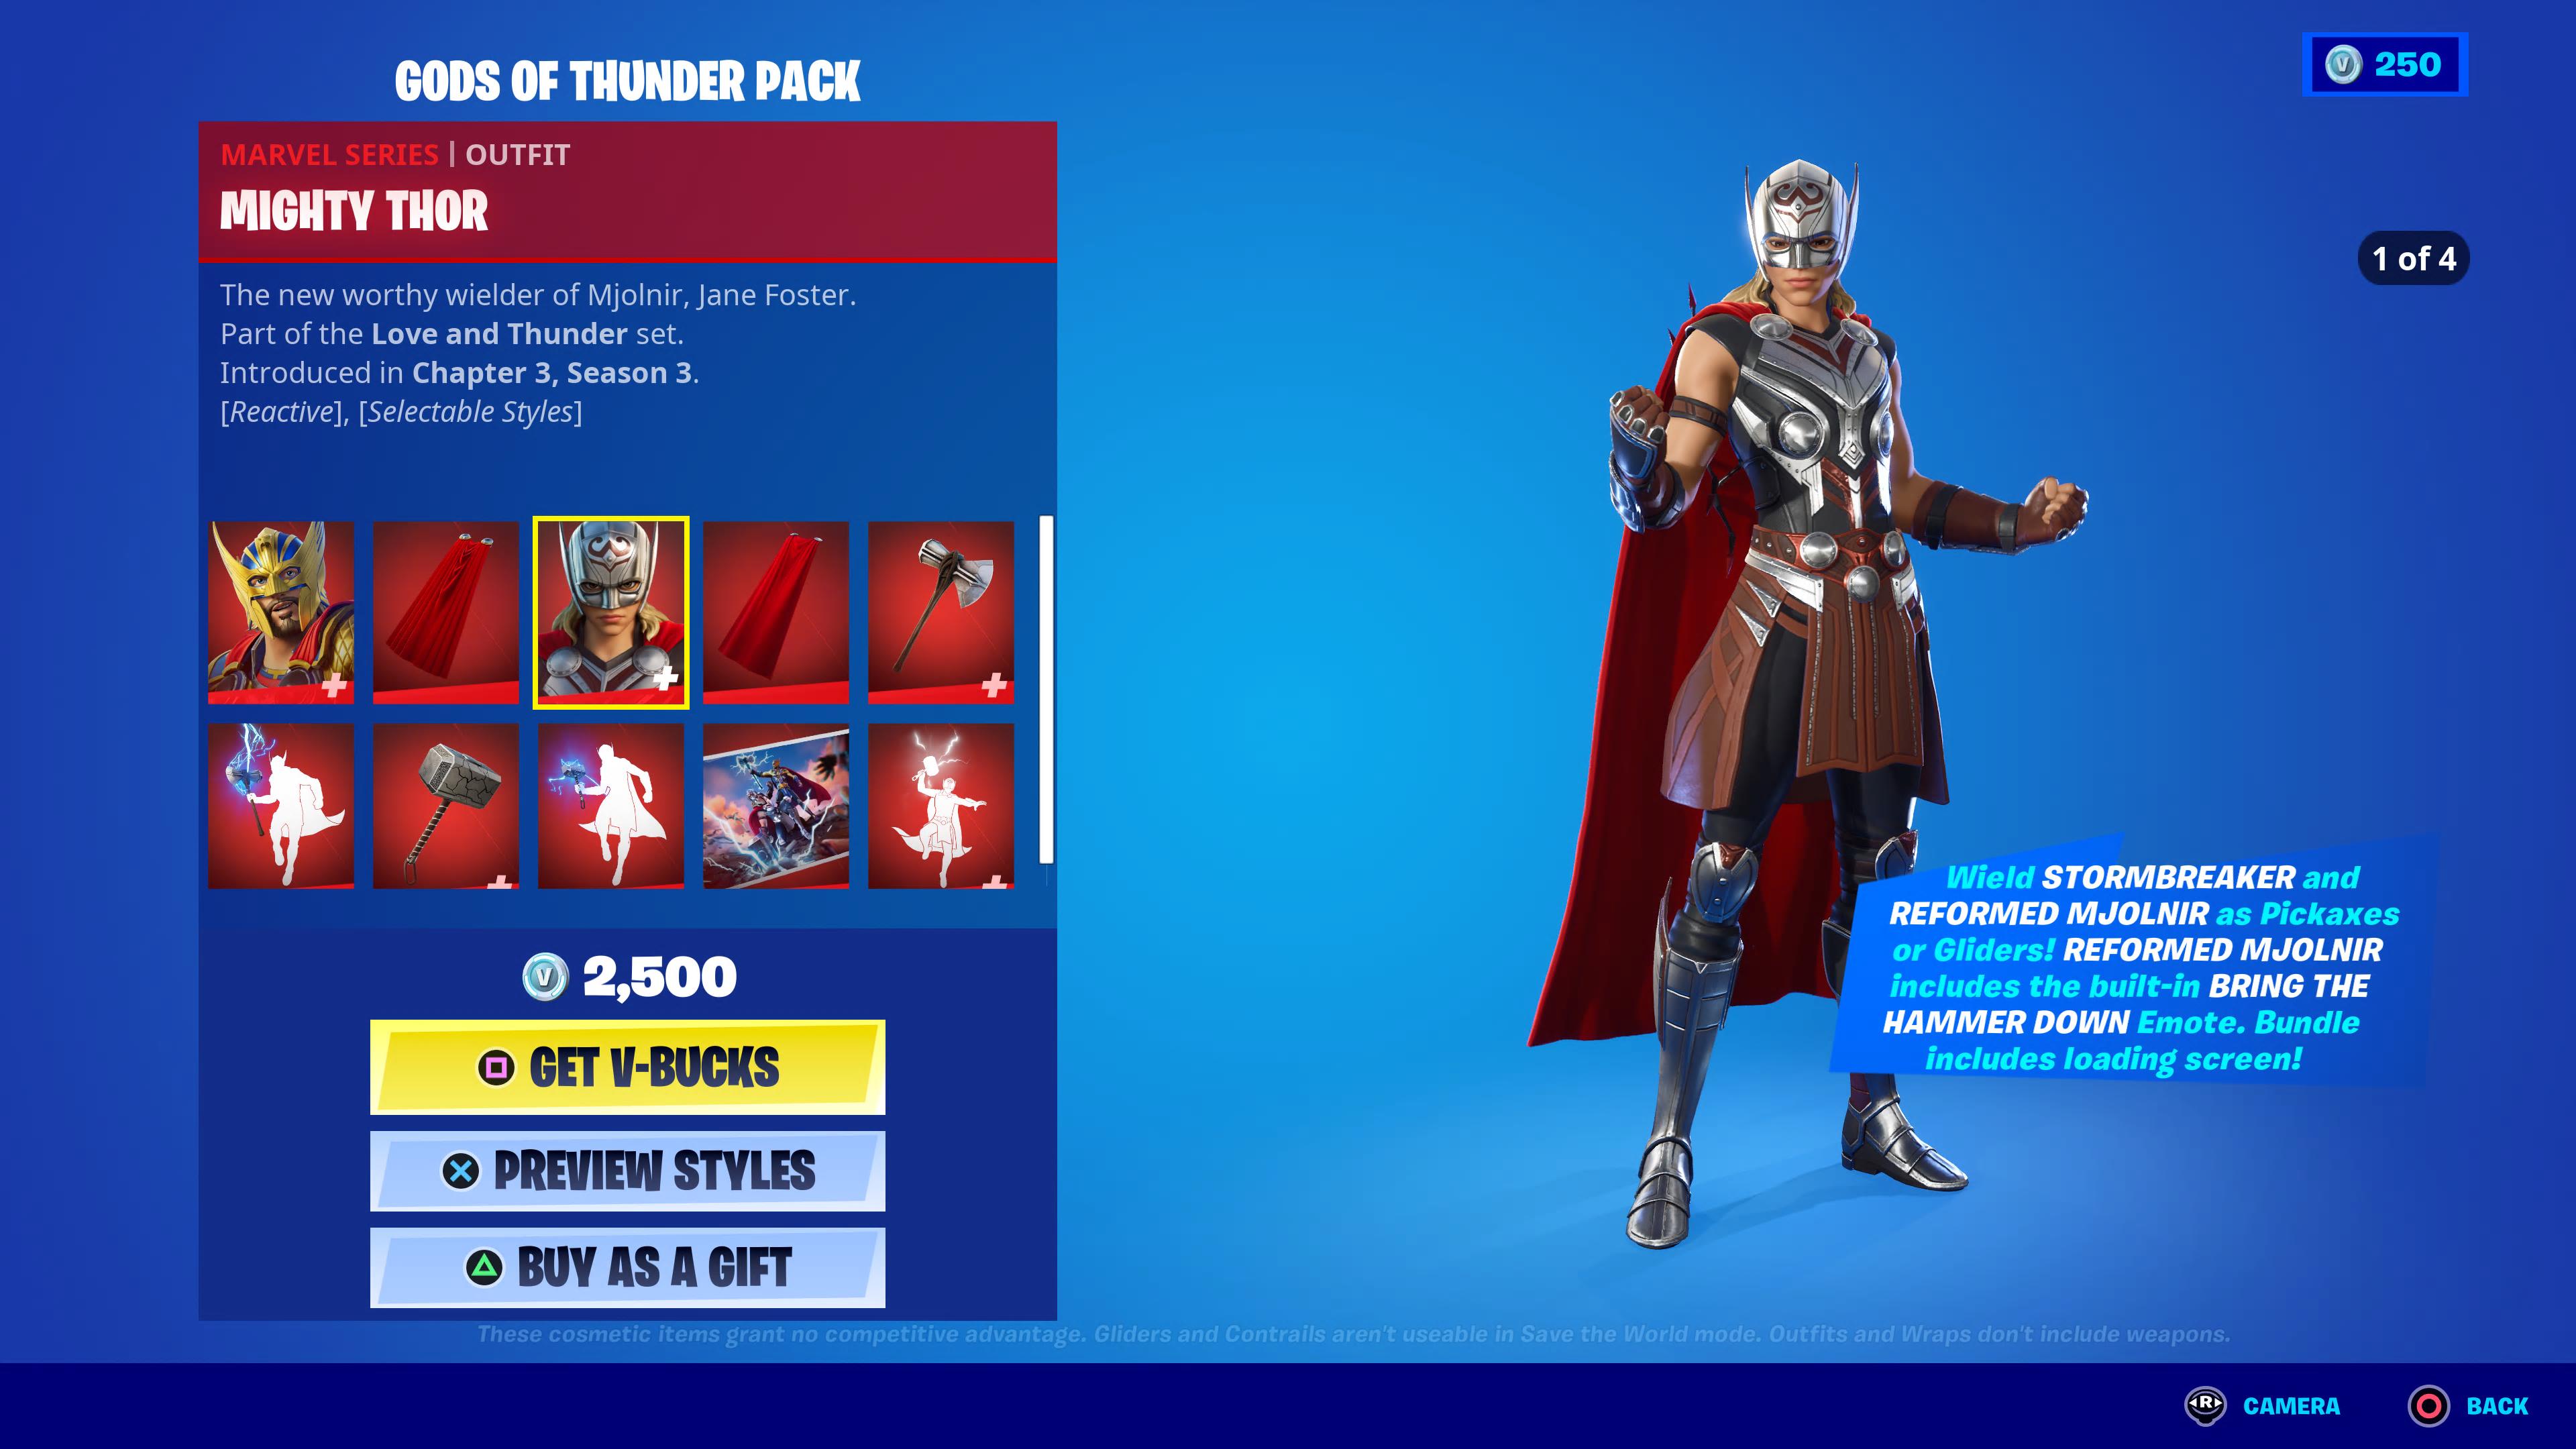 How To Get New Cloud Striker Skin Celebration Pack NOW FREE In Fortnite! -  Free Celebration Pack! 